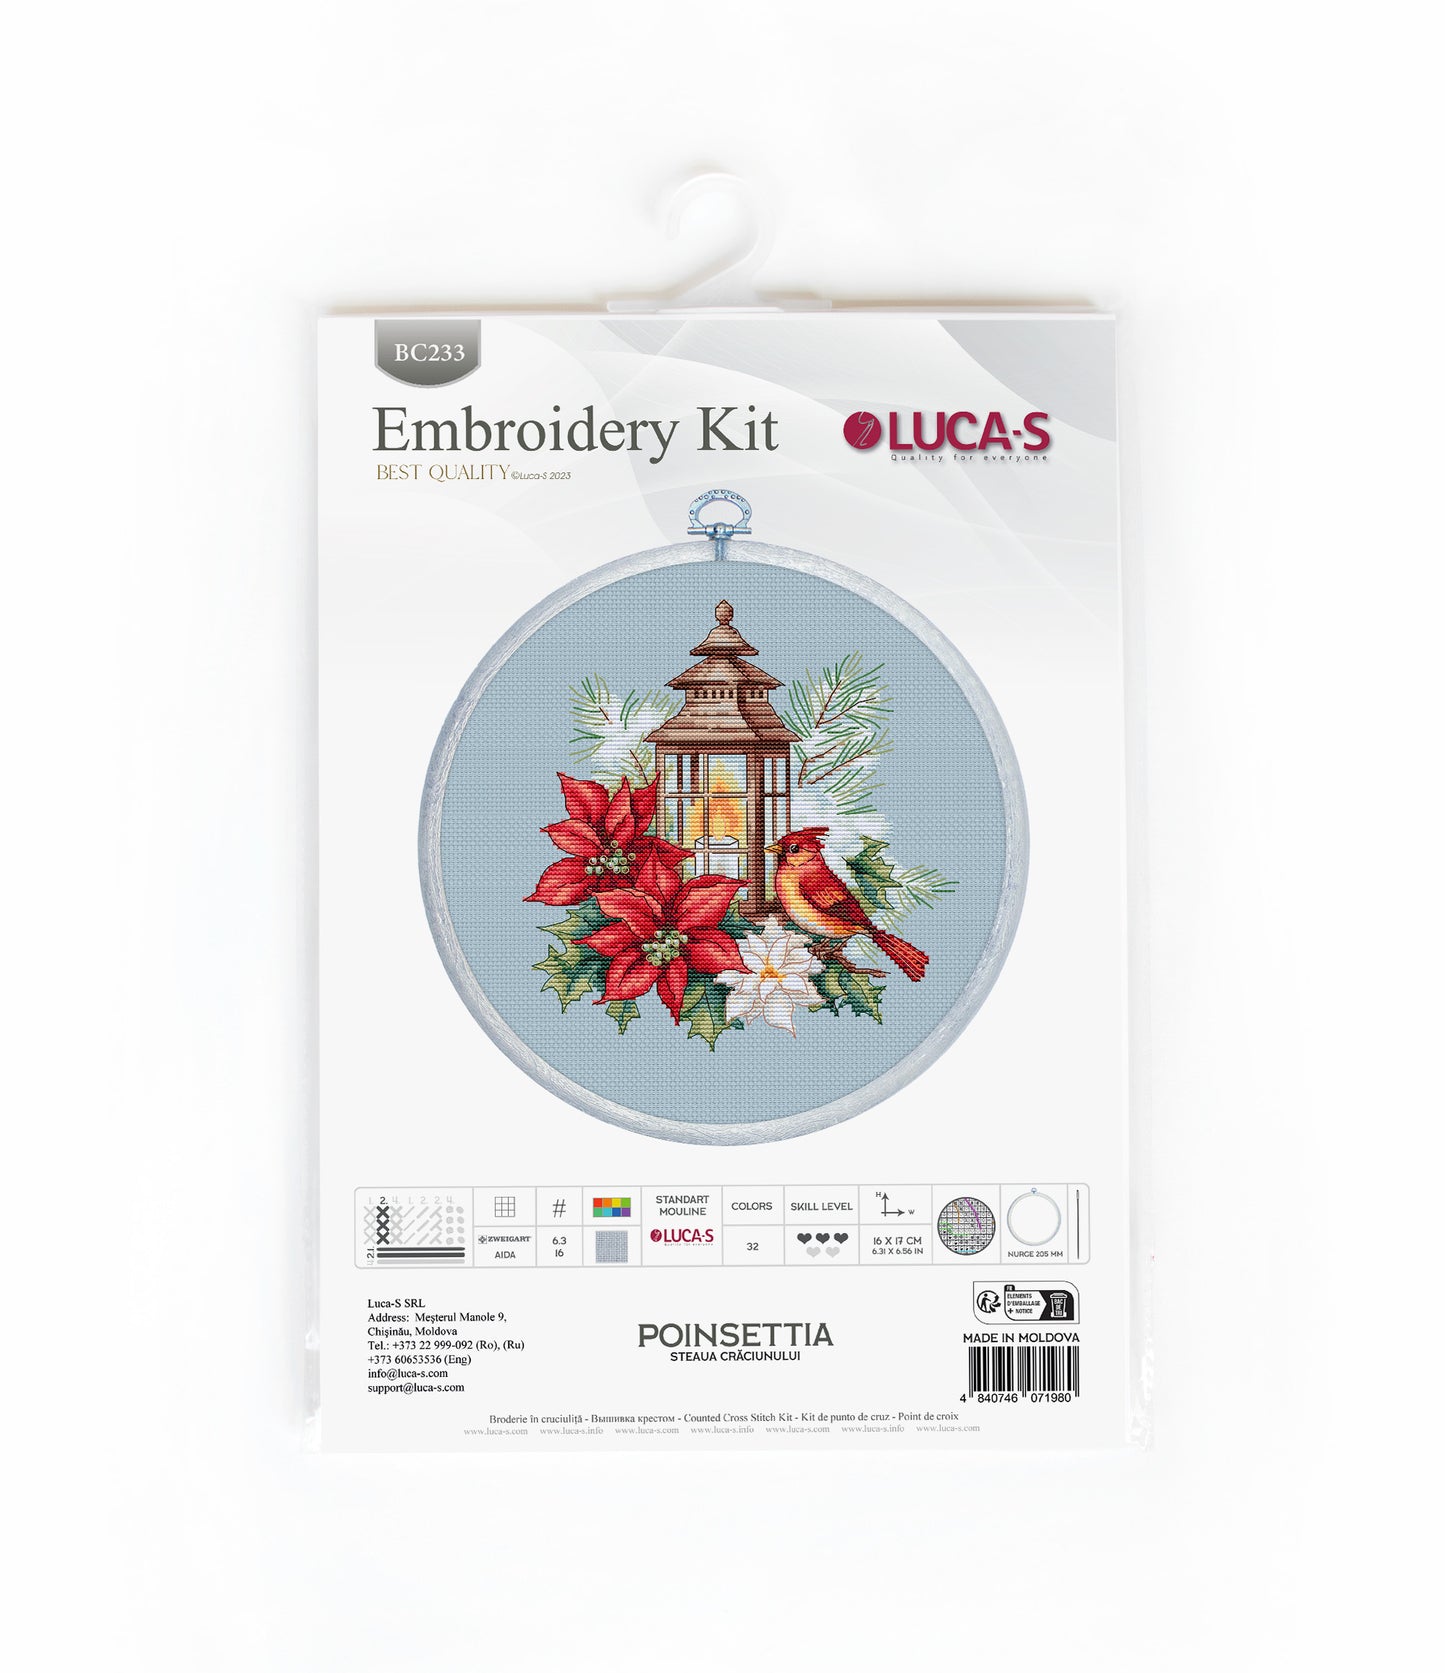 Cross Stitch Kit with Hoop Included Luca-S - Poinsettia, BC233